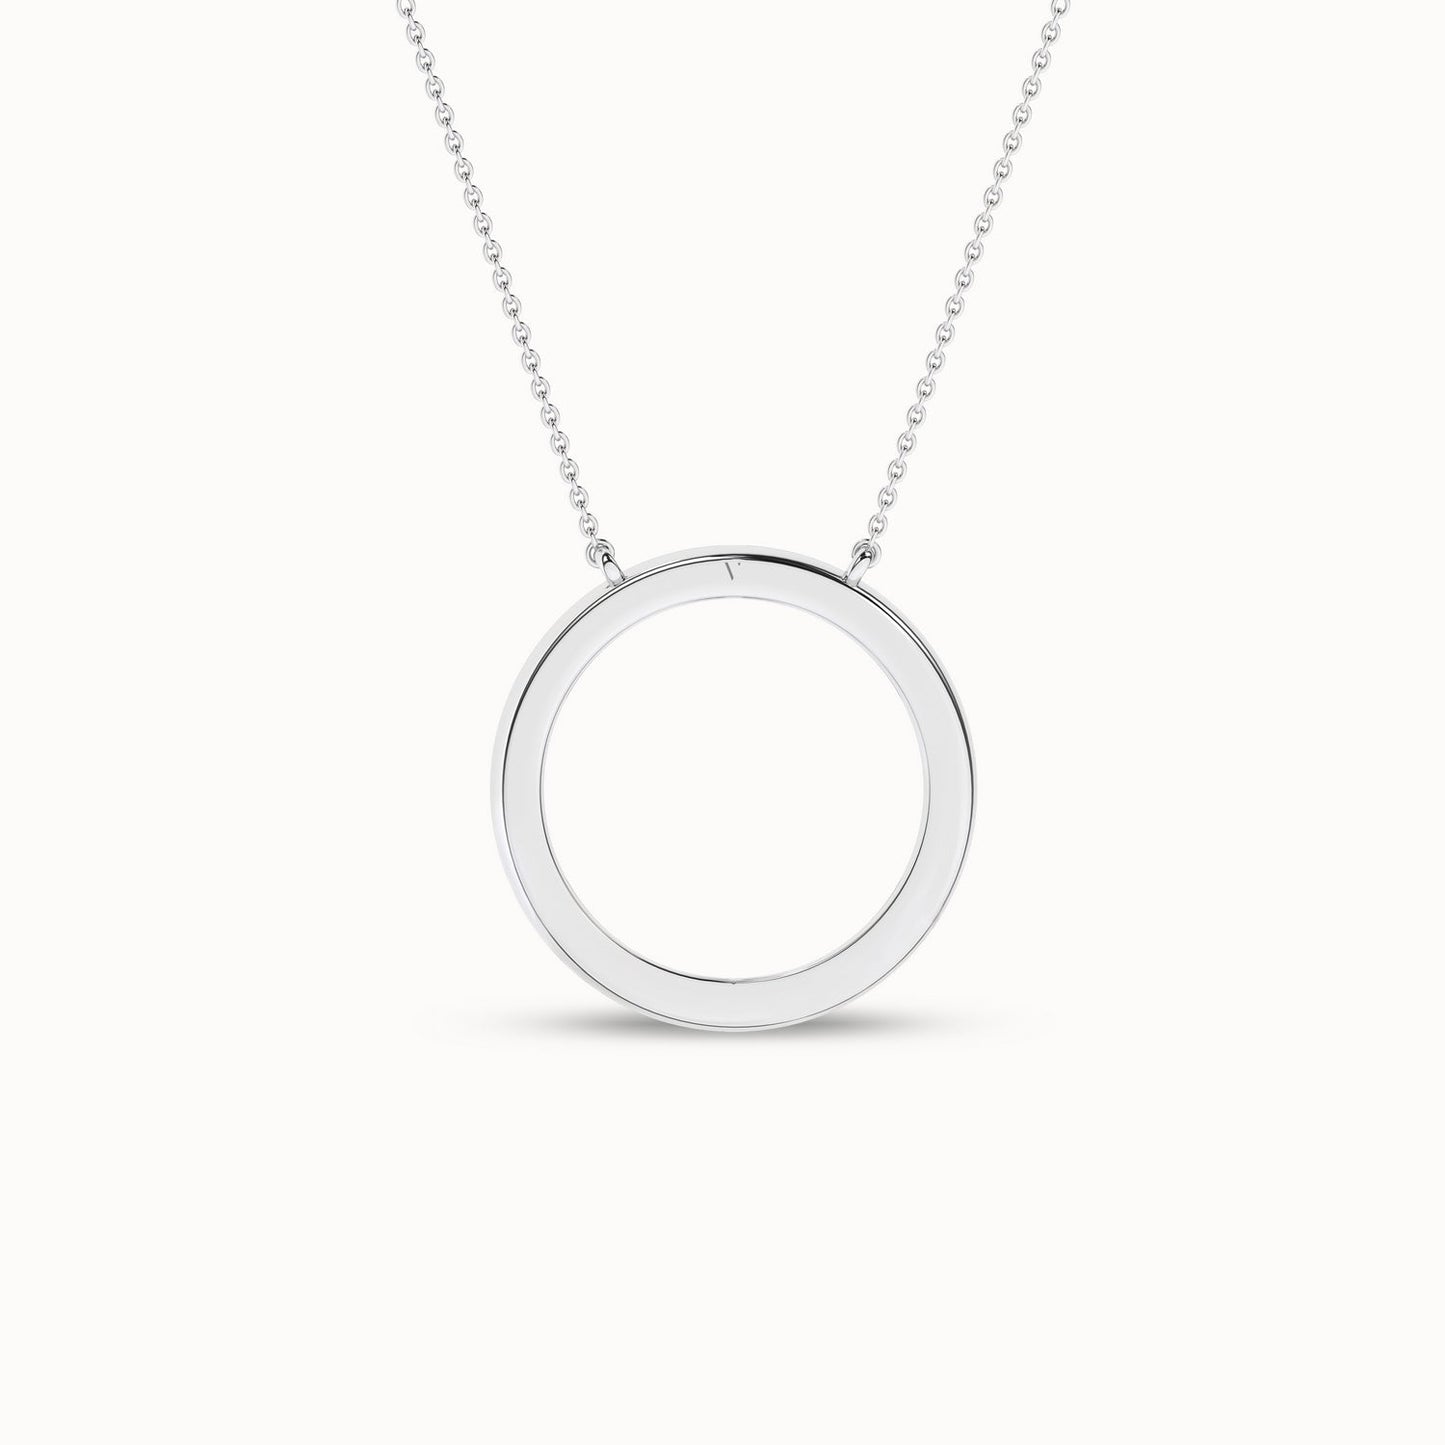 Circular Silhouette Necklace_Product Angle_1/3Ct. - 3